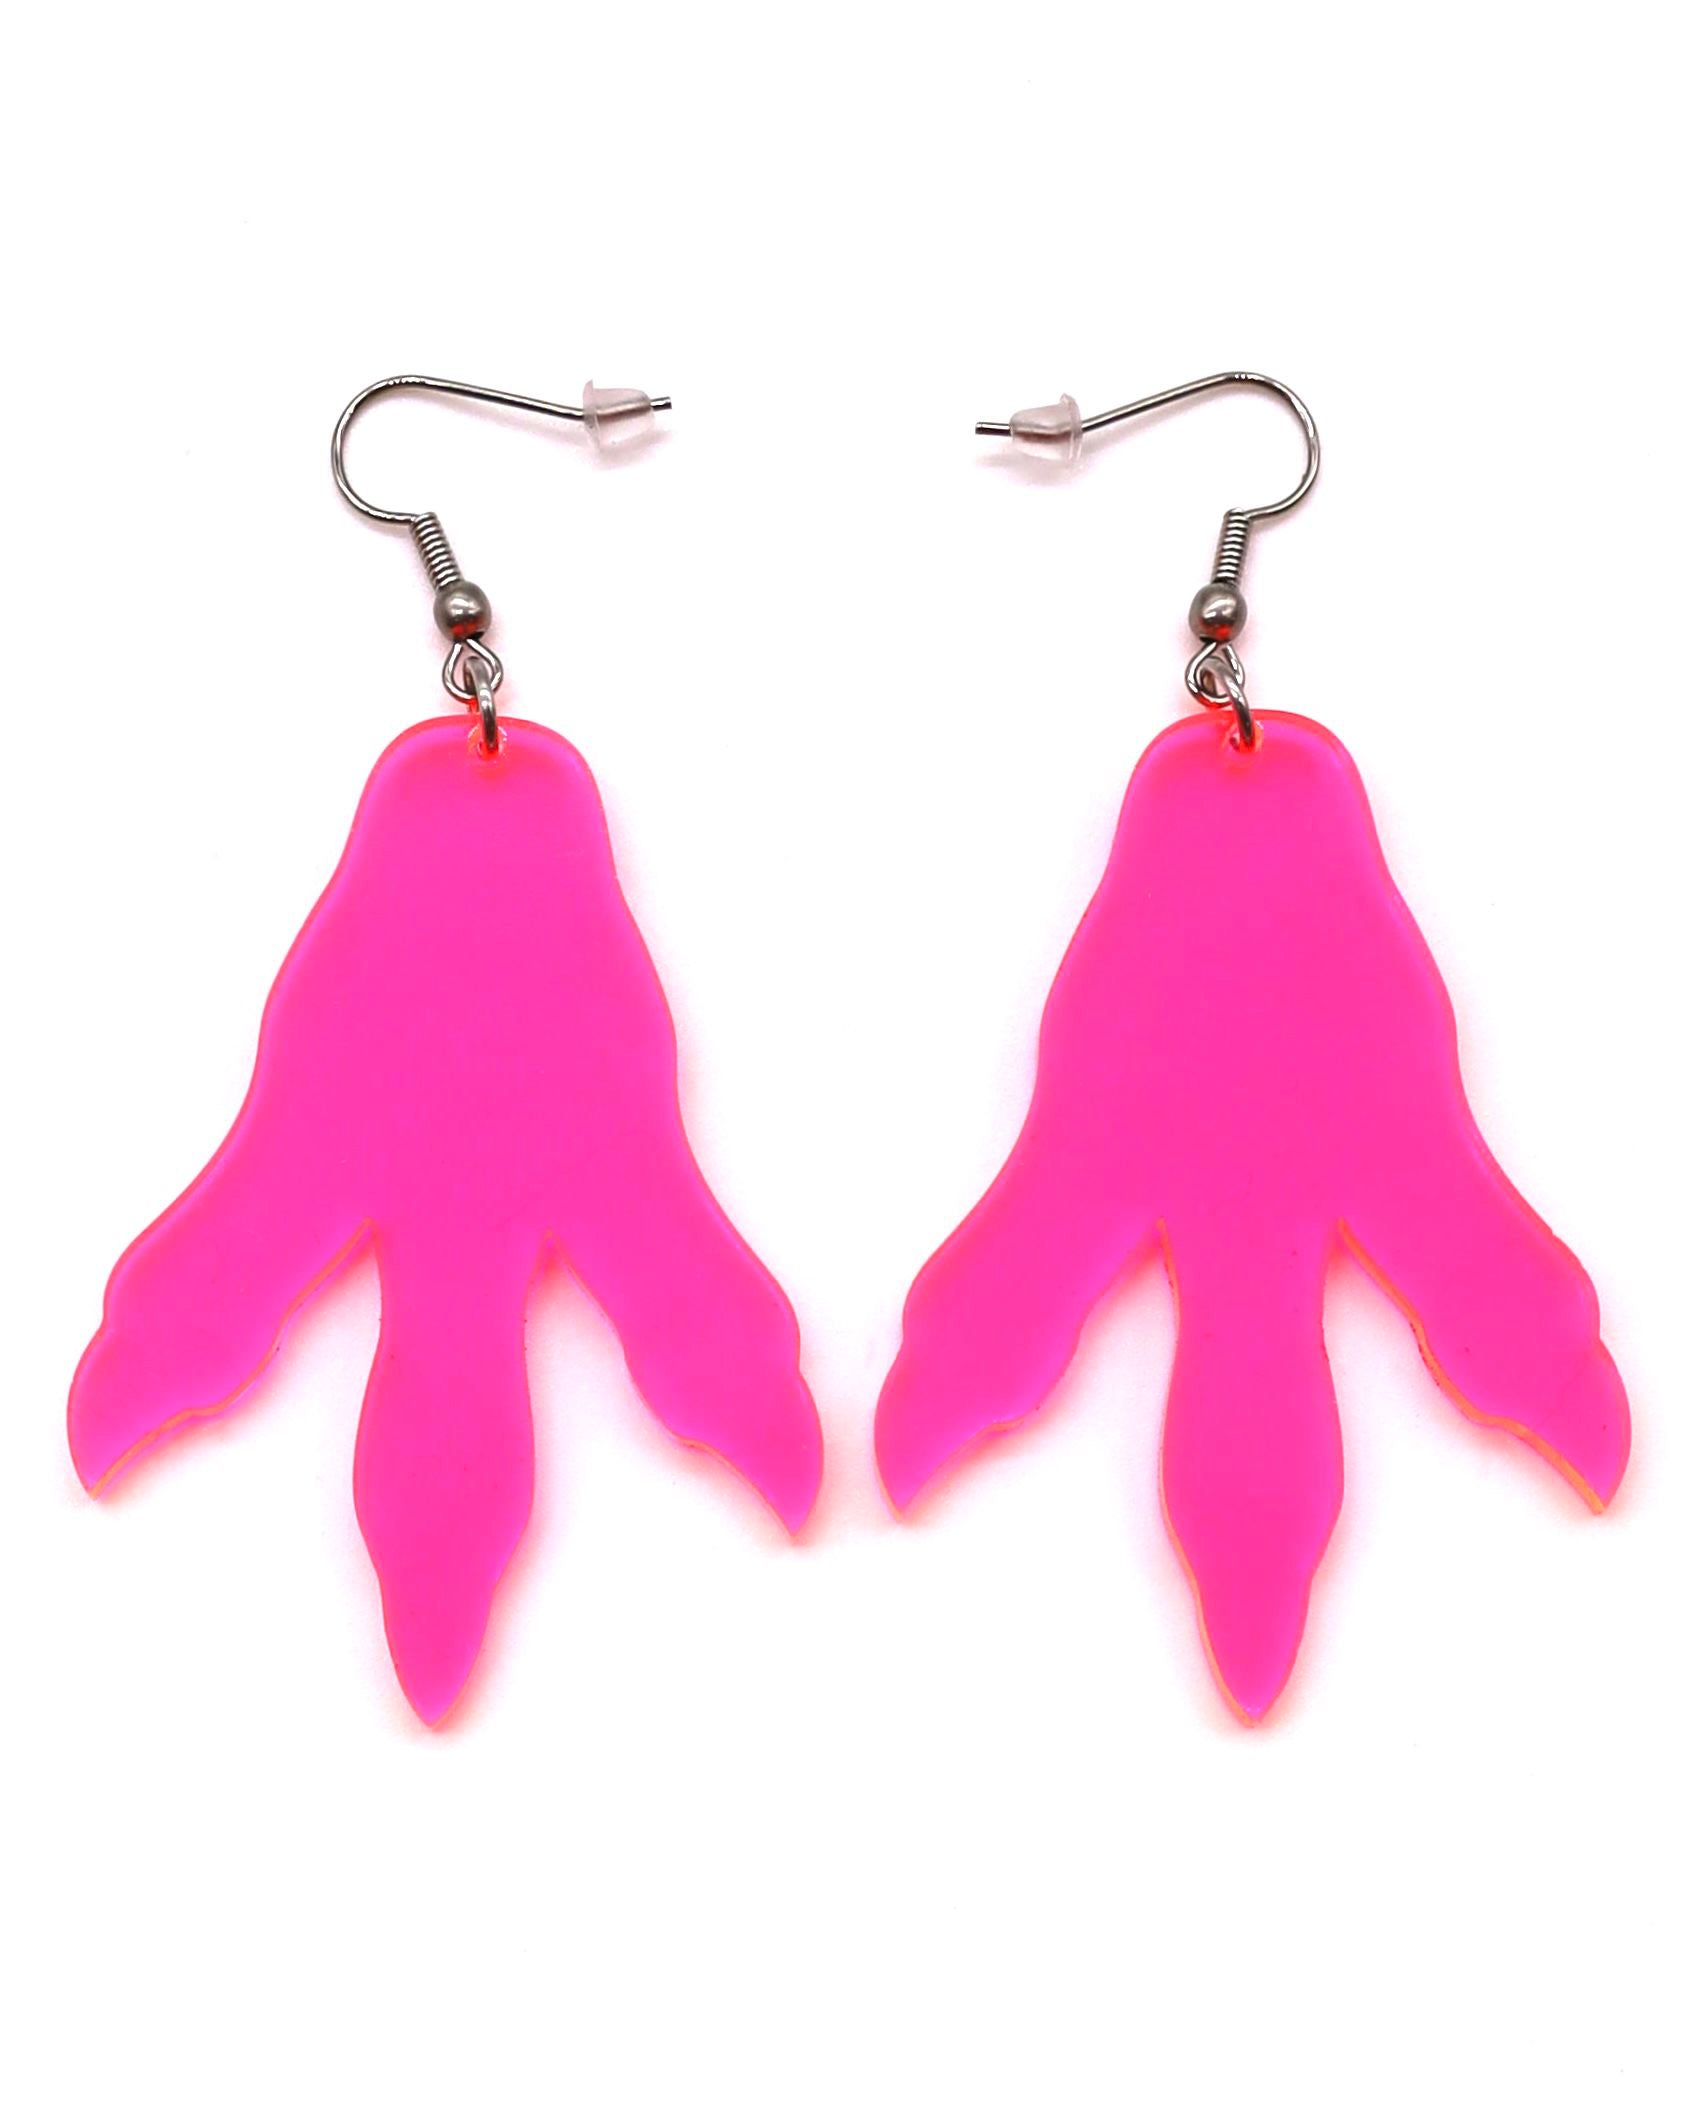 Dino Print Earrings in Hot Pink - Stand Out and Shine with Festival Flair